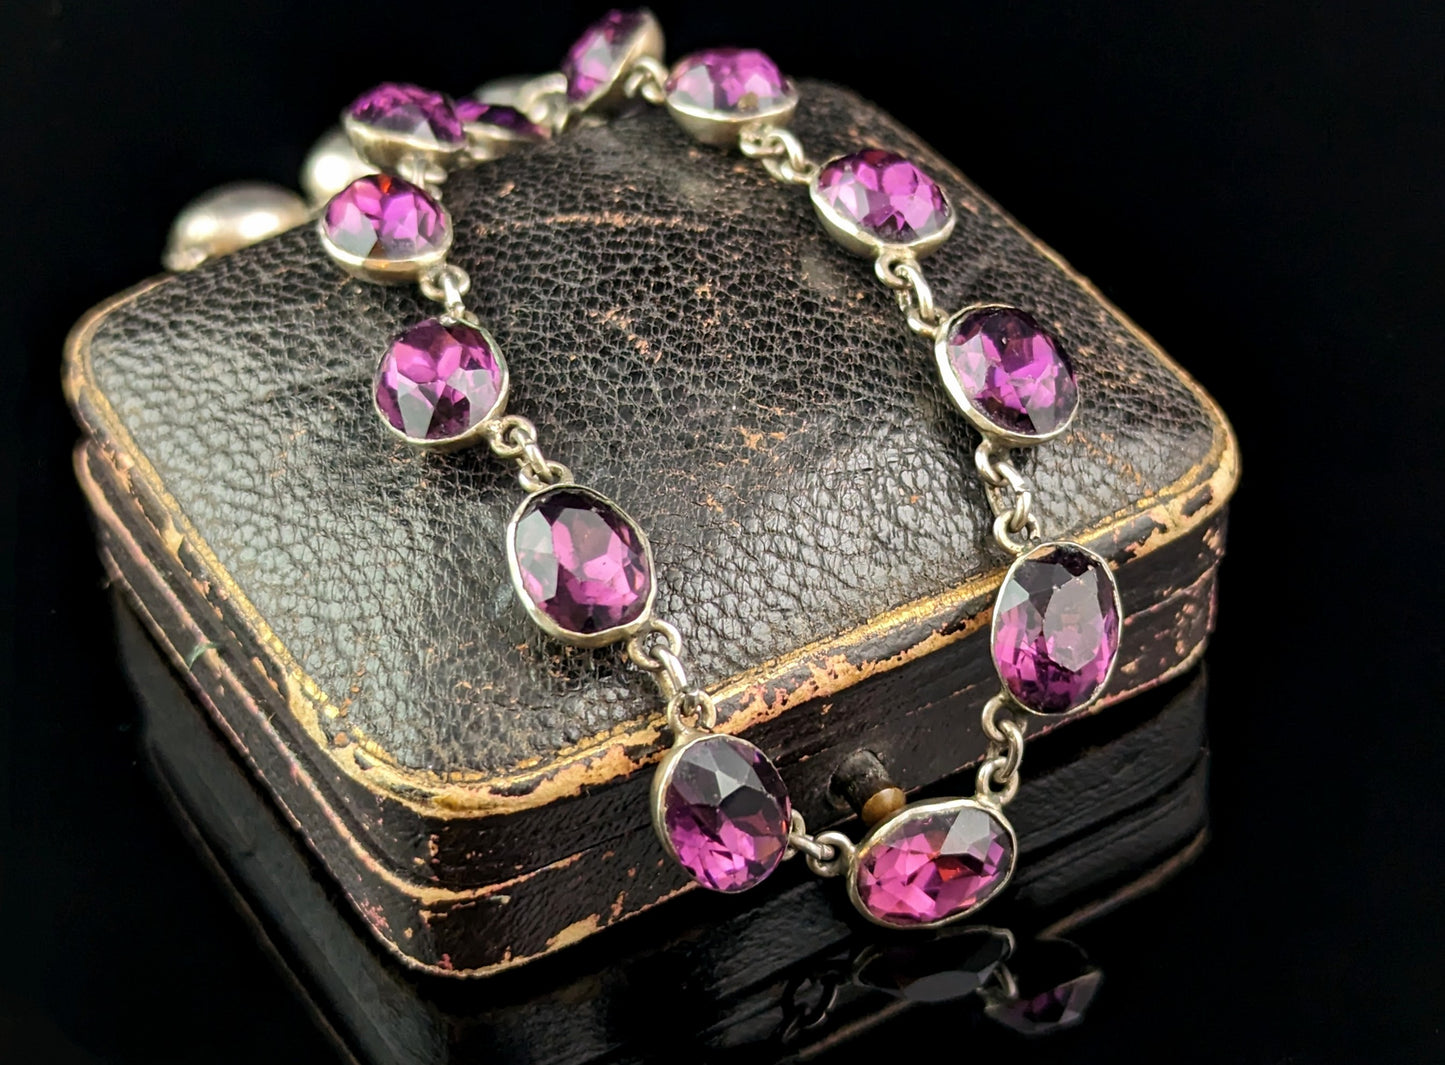 Antique Amethyst paste riviere necklace, sterling silver, 19th Century